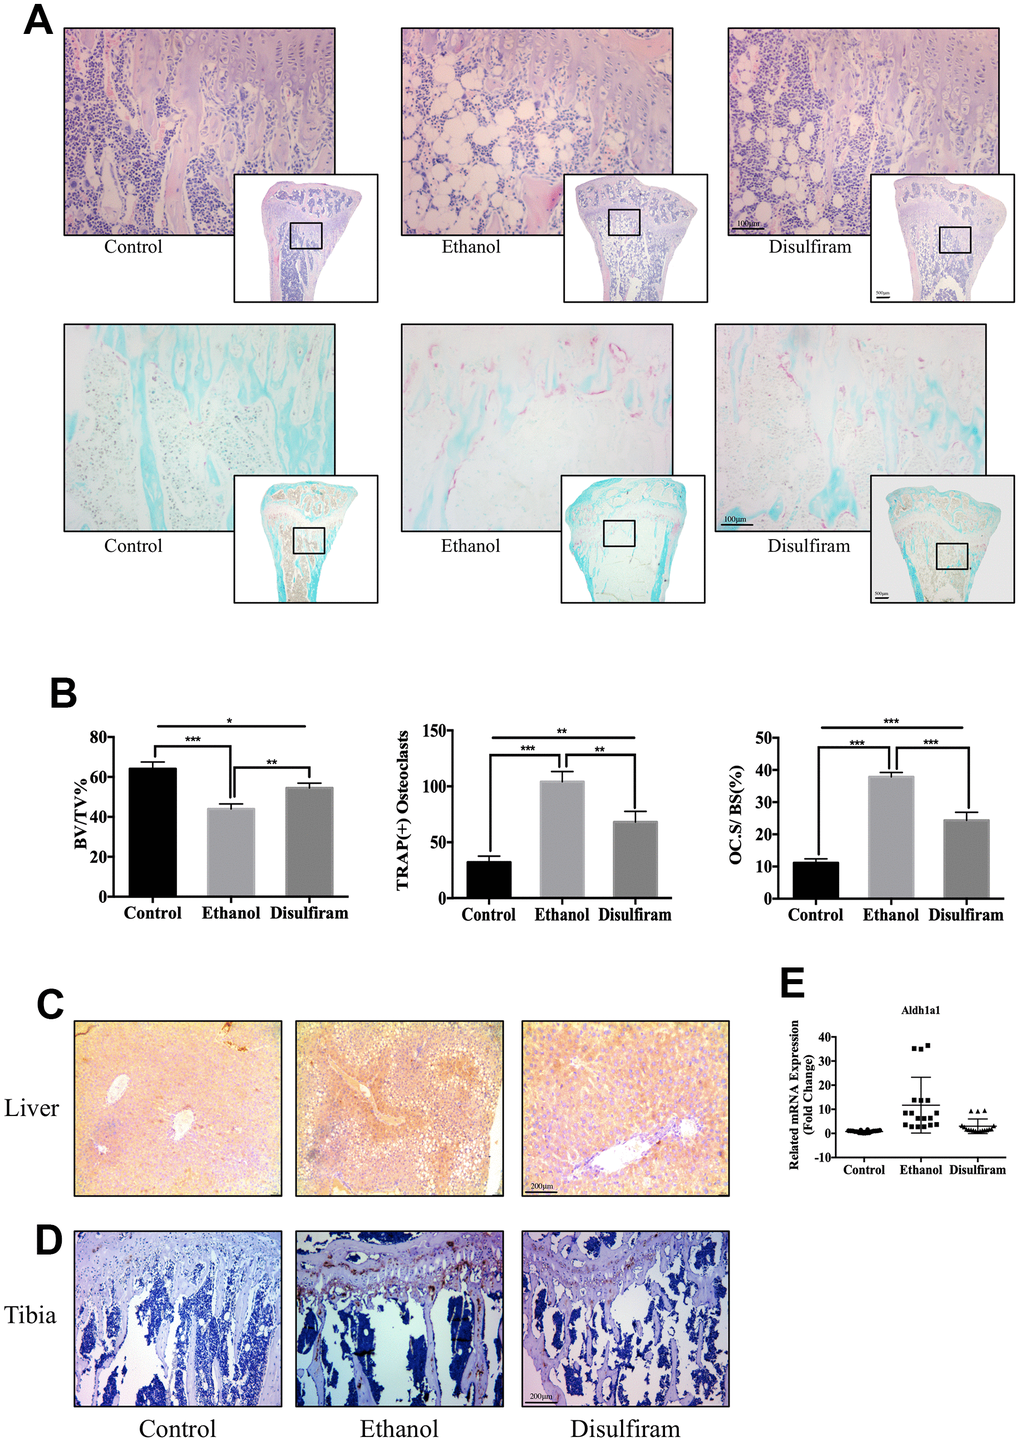 Disulfiram protected against Alcohol-Induced bone loss via ALDH1A1. (A) Sections of tibias were stained with H&E and TRAP. (B) Data of quantitative analyses of histomorphometric bone parameters of the bone volume to tissue volume (BV/TV), number of TRAP-positive OCs, and percentage of the OC surface to bone surface (Oc.S/BS, %) (n = 6). (C) Immunohistochemical staining of ALDH1A1 expression in the liver. (D) Immunohistochemical staining of ALDH1A1 expression in the tibia. (E) qPCR was conducted to measure the relative levels of gene expression, normalized to those of β-actin, in each group of mice (n = 6). Bar graphs are presented as the mean ± SD. *p p p 